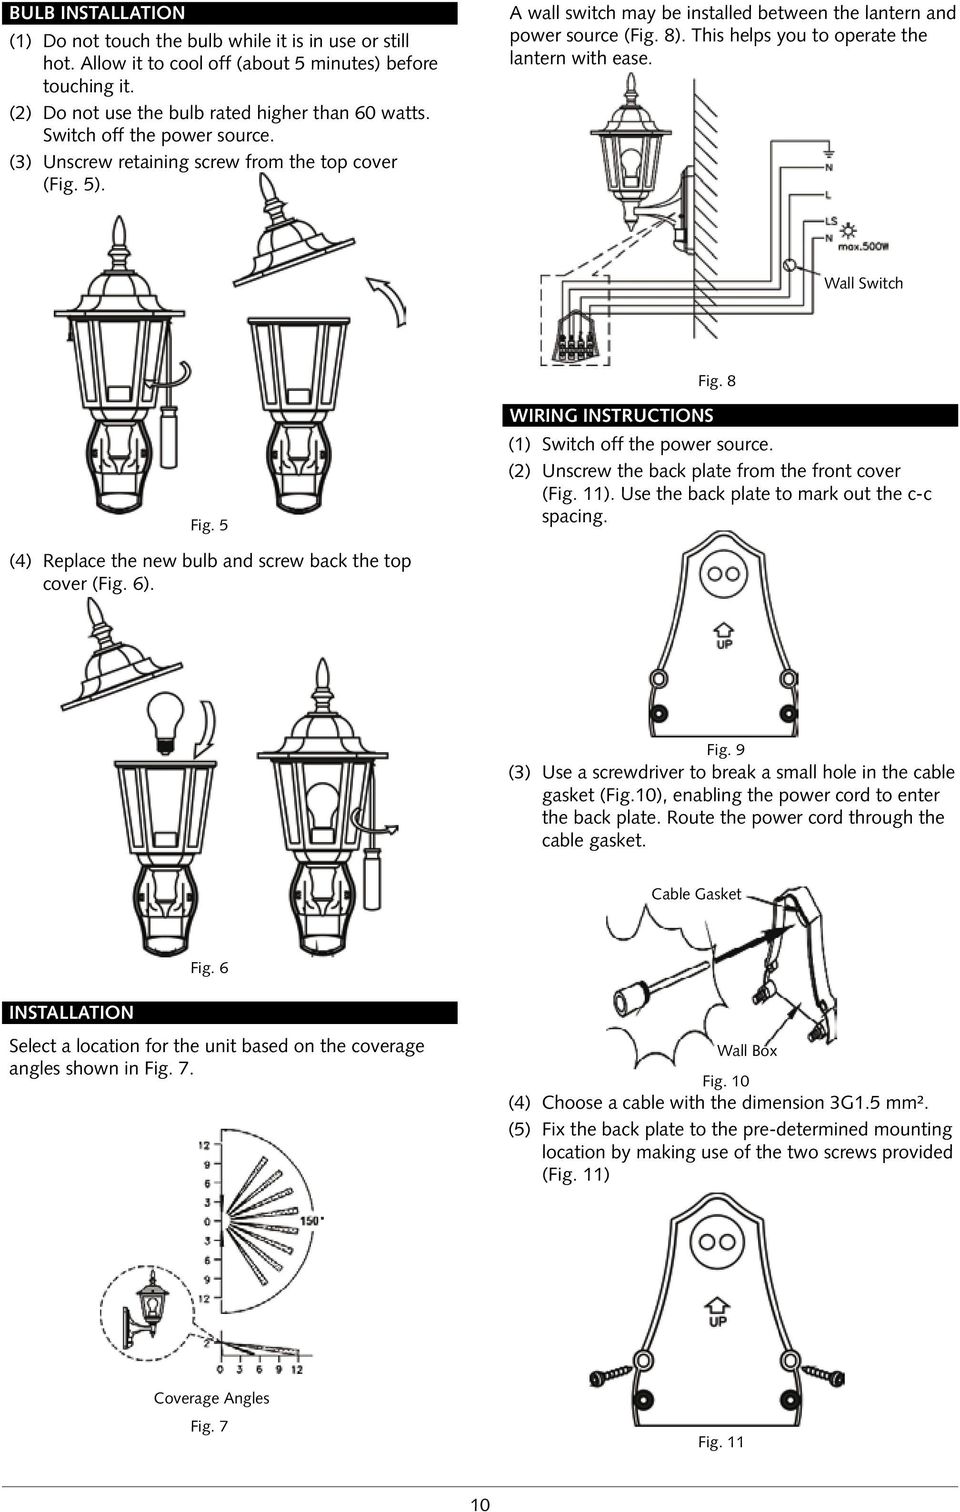 This helps you to operate the lantern with ease. Wall Switch Fig. 8 Fig. 5 WIRING INSTRUCTIONs (1) Switch off the power source. (2) Unscrew the back plate from the front cover (Fig. 11).